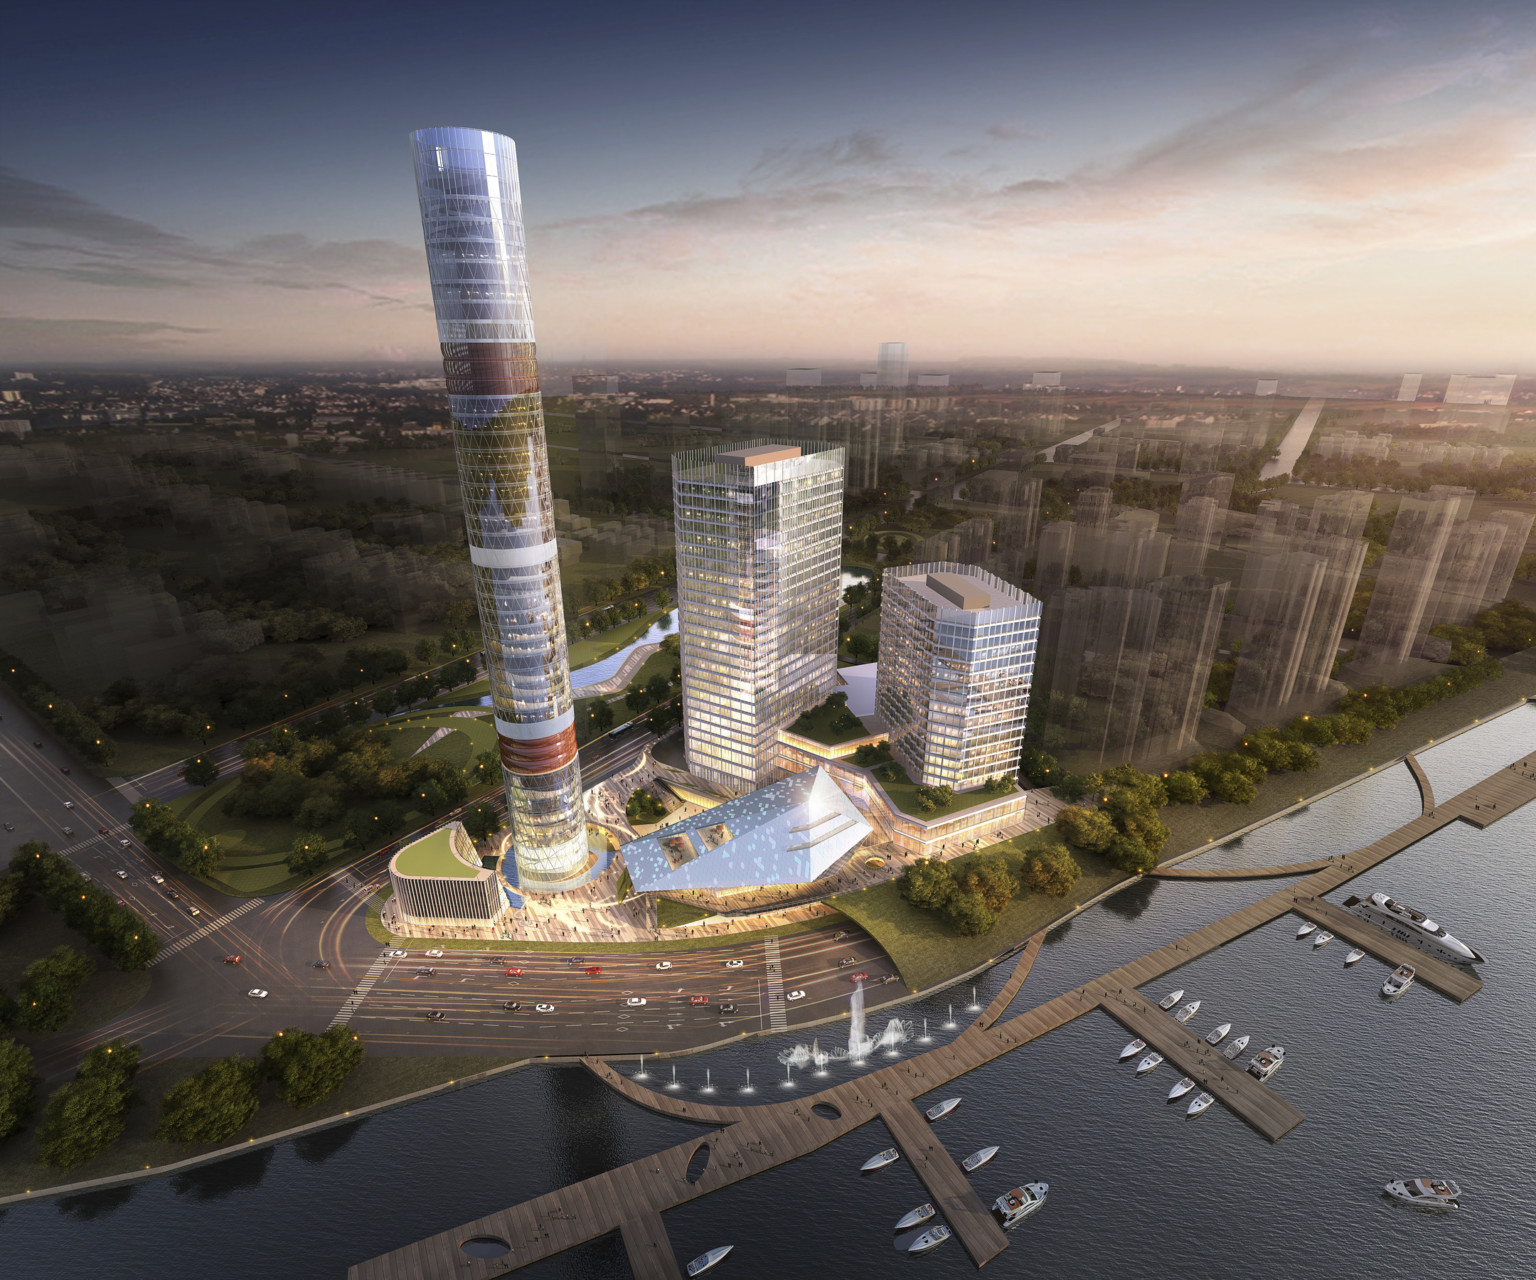 The Baoshan Long Beach Mixed Use Tower, cylindrical glass tower on a site with 4 other buildings next to the water